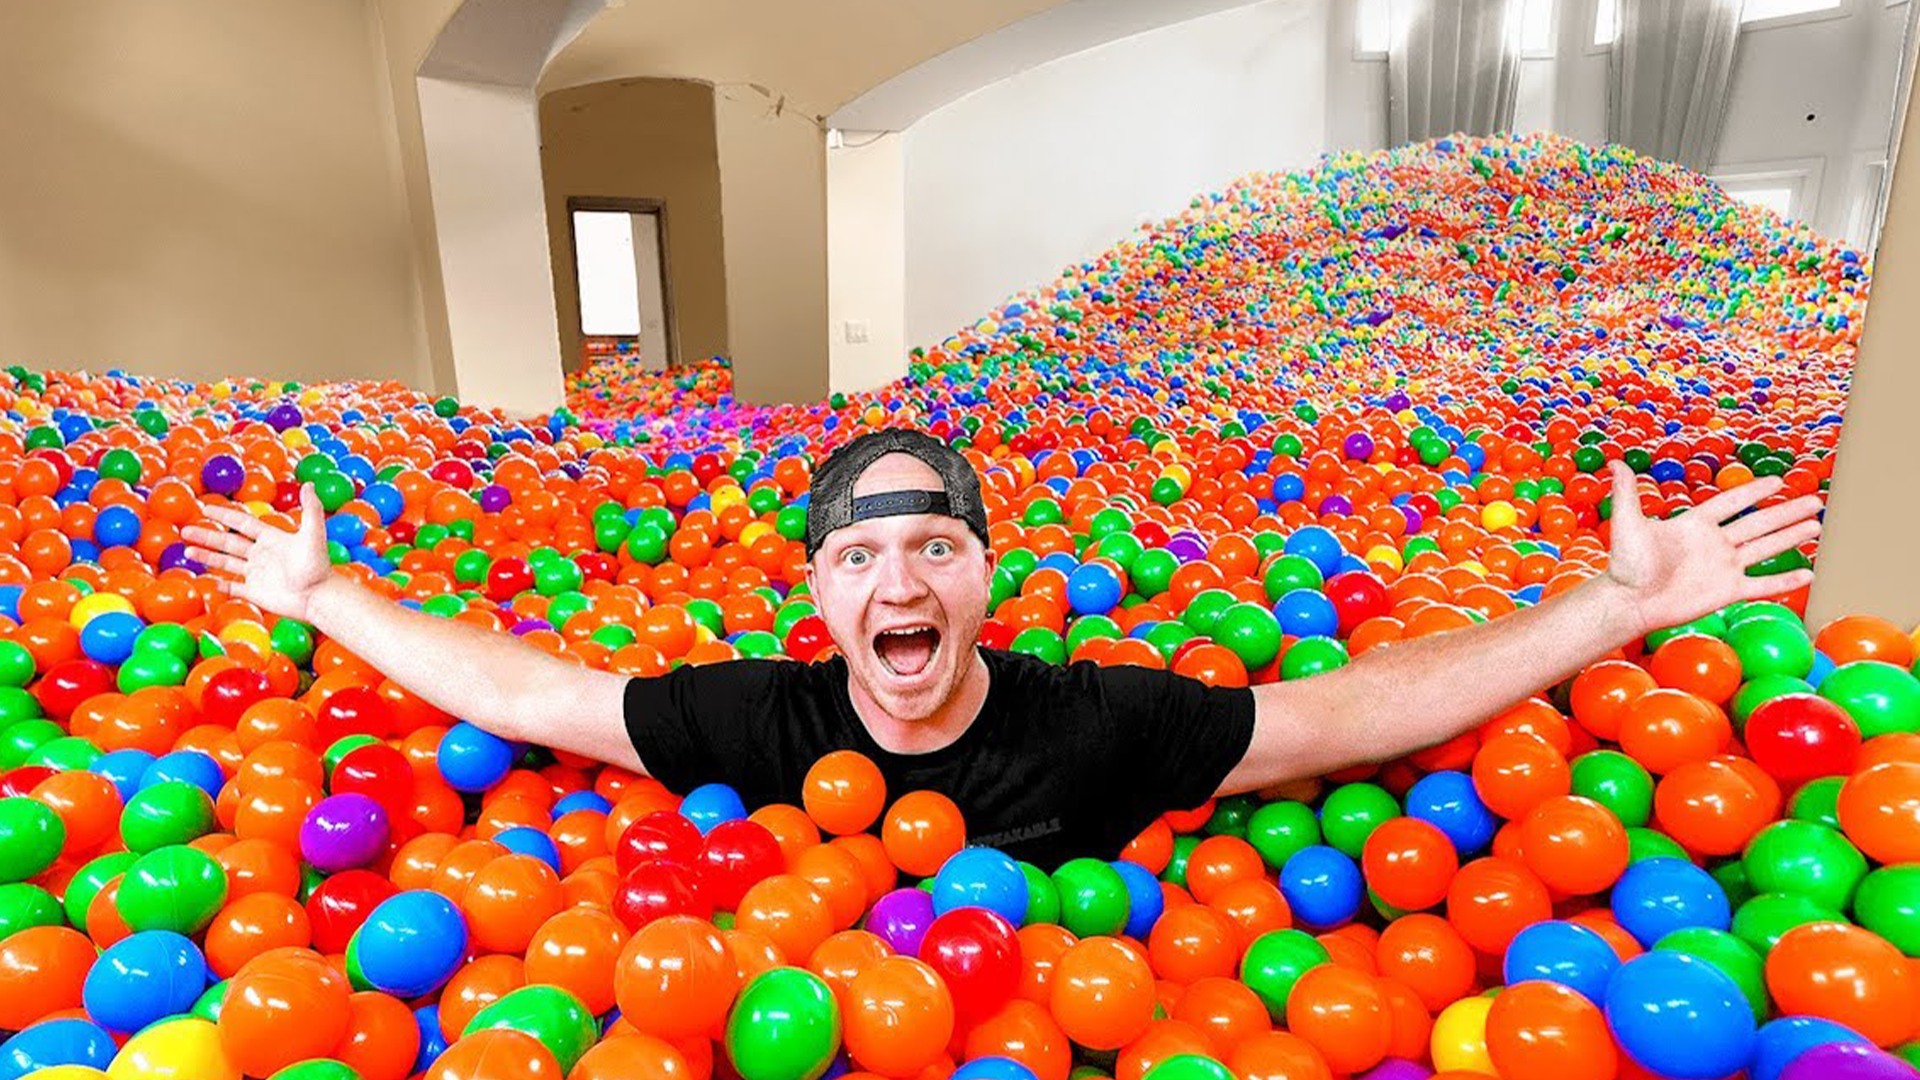 Unspeakable in a ball pit in his house